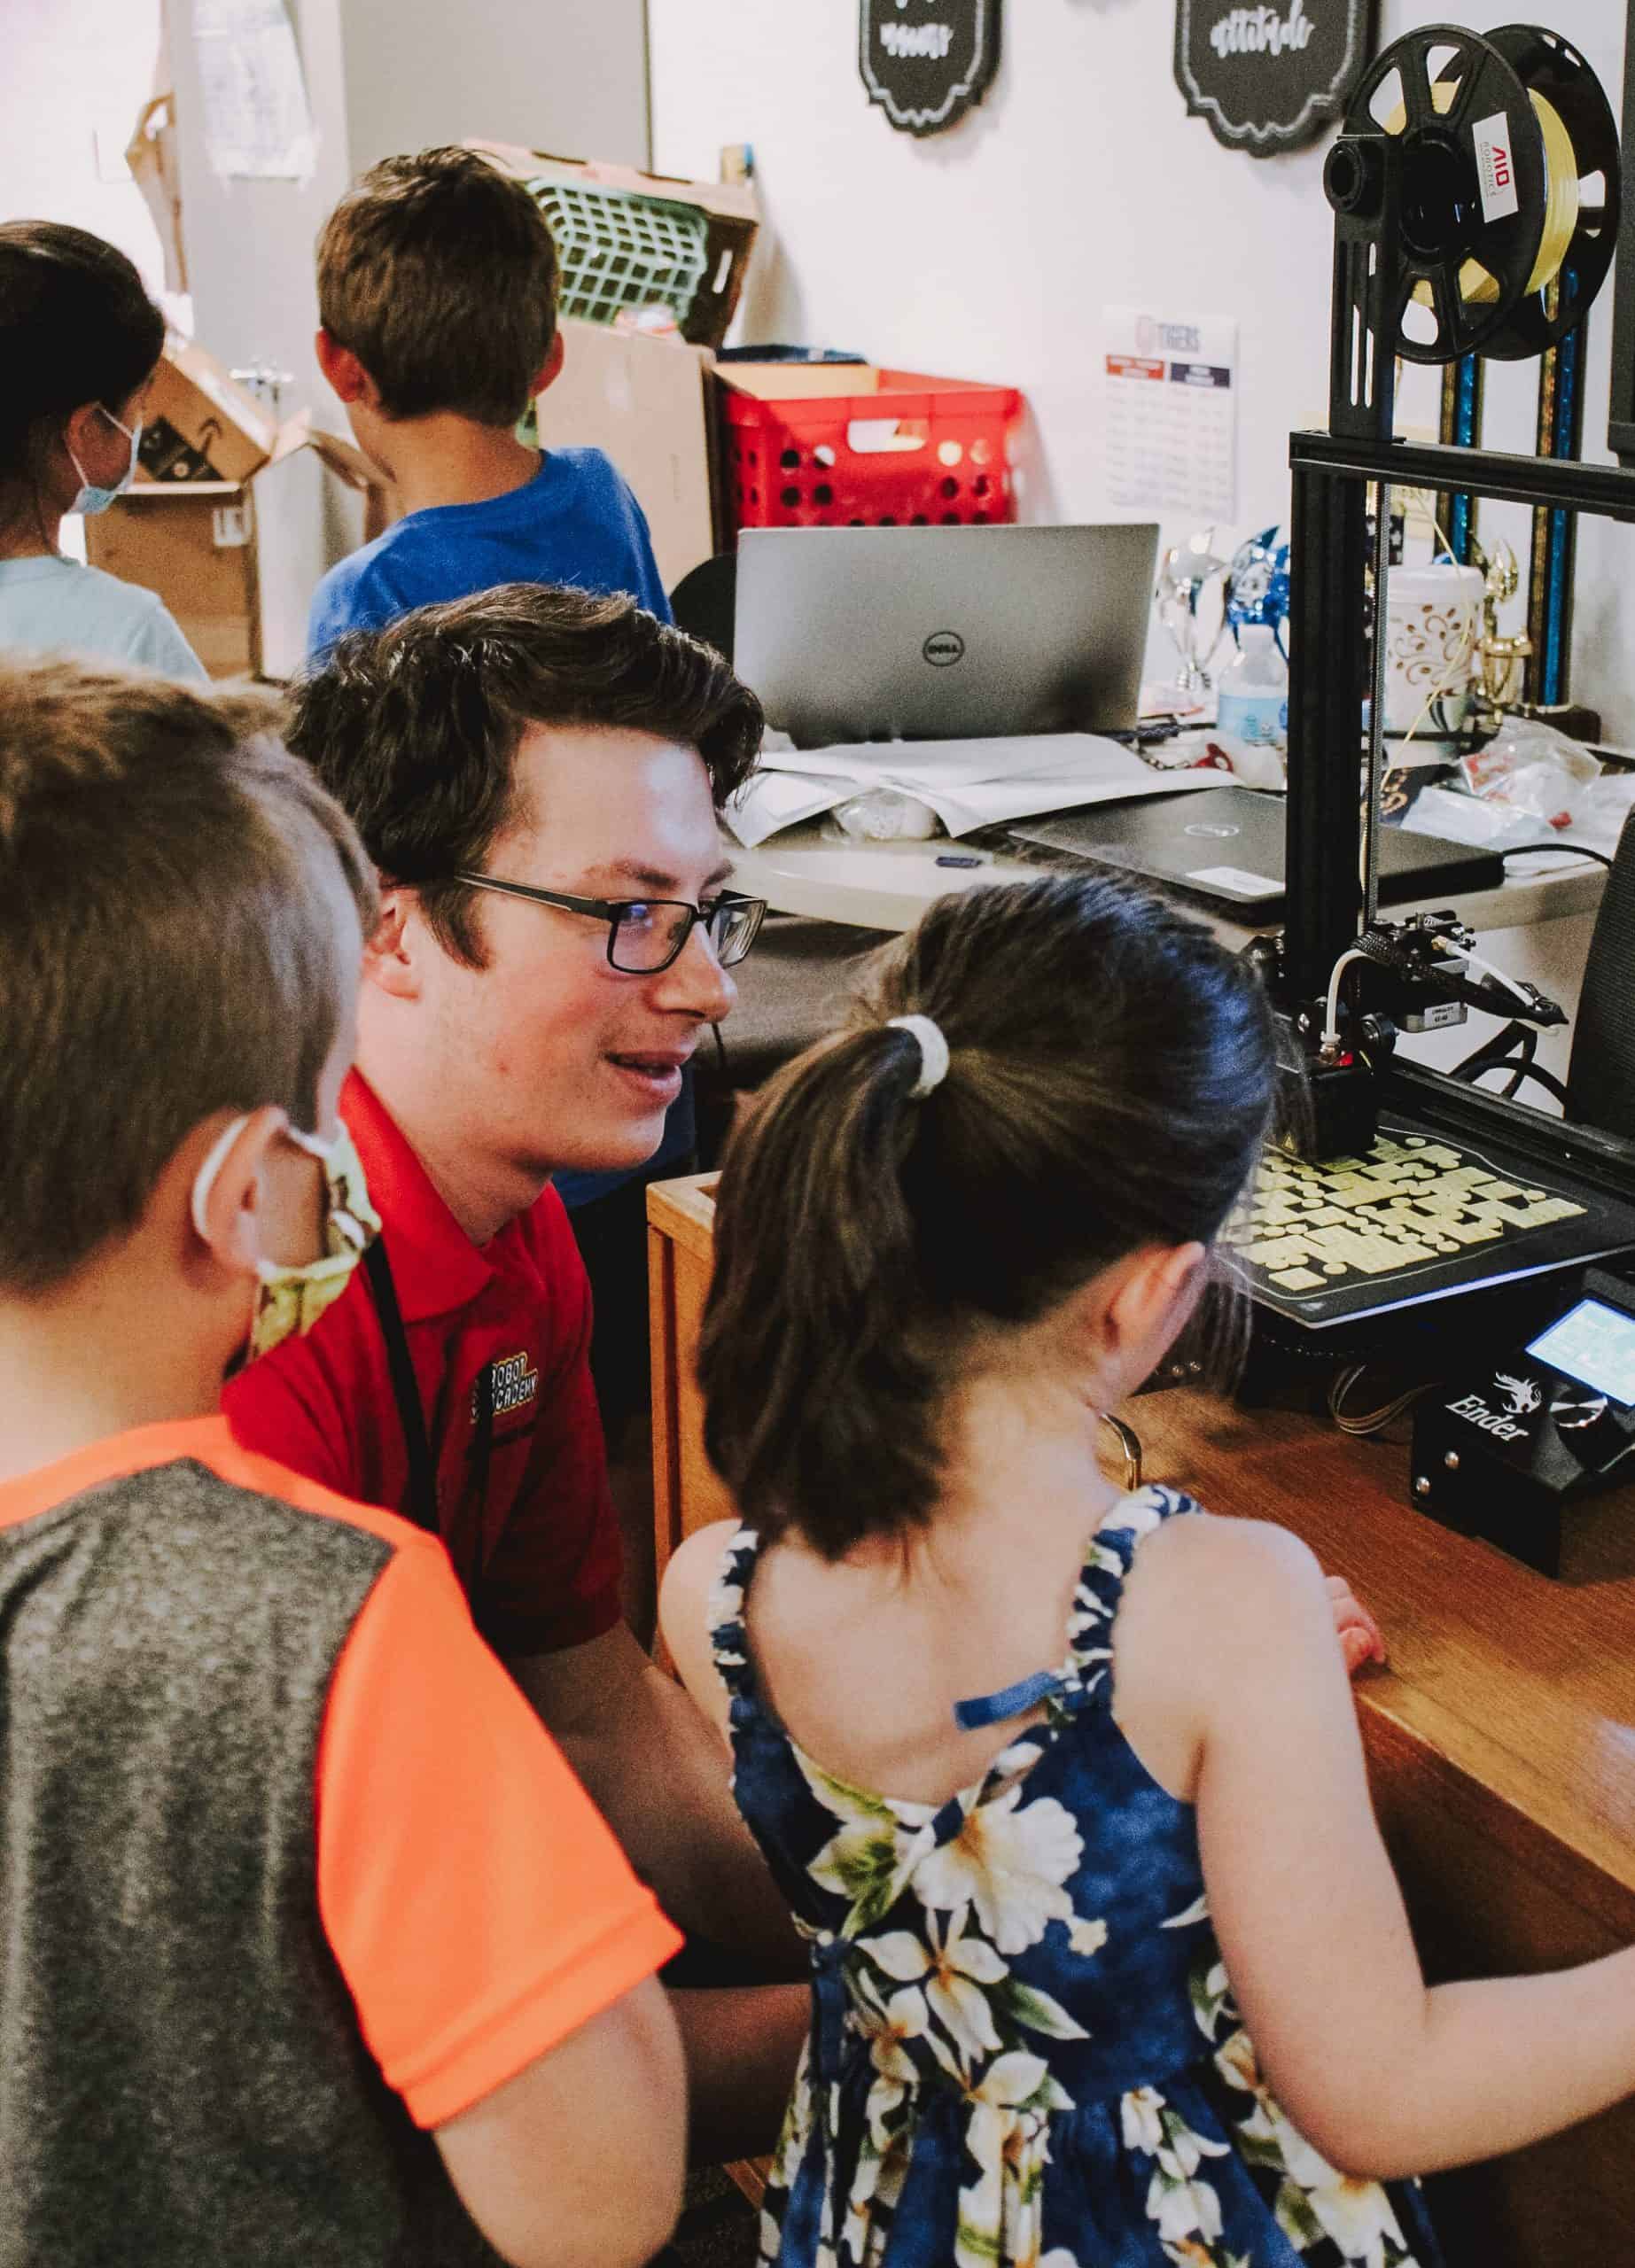 You are currently viewing Sr. LEGO® Robotics & 3D Printing Camp for ages 8 to 13 | Full Day | 5 Days: July 24-28, 2023 | 9:30 am to 4:30 pm | Powell